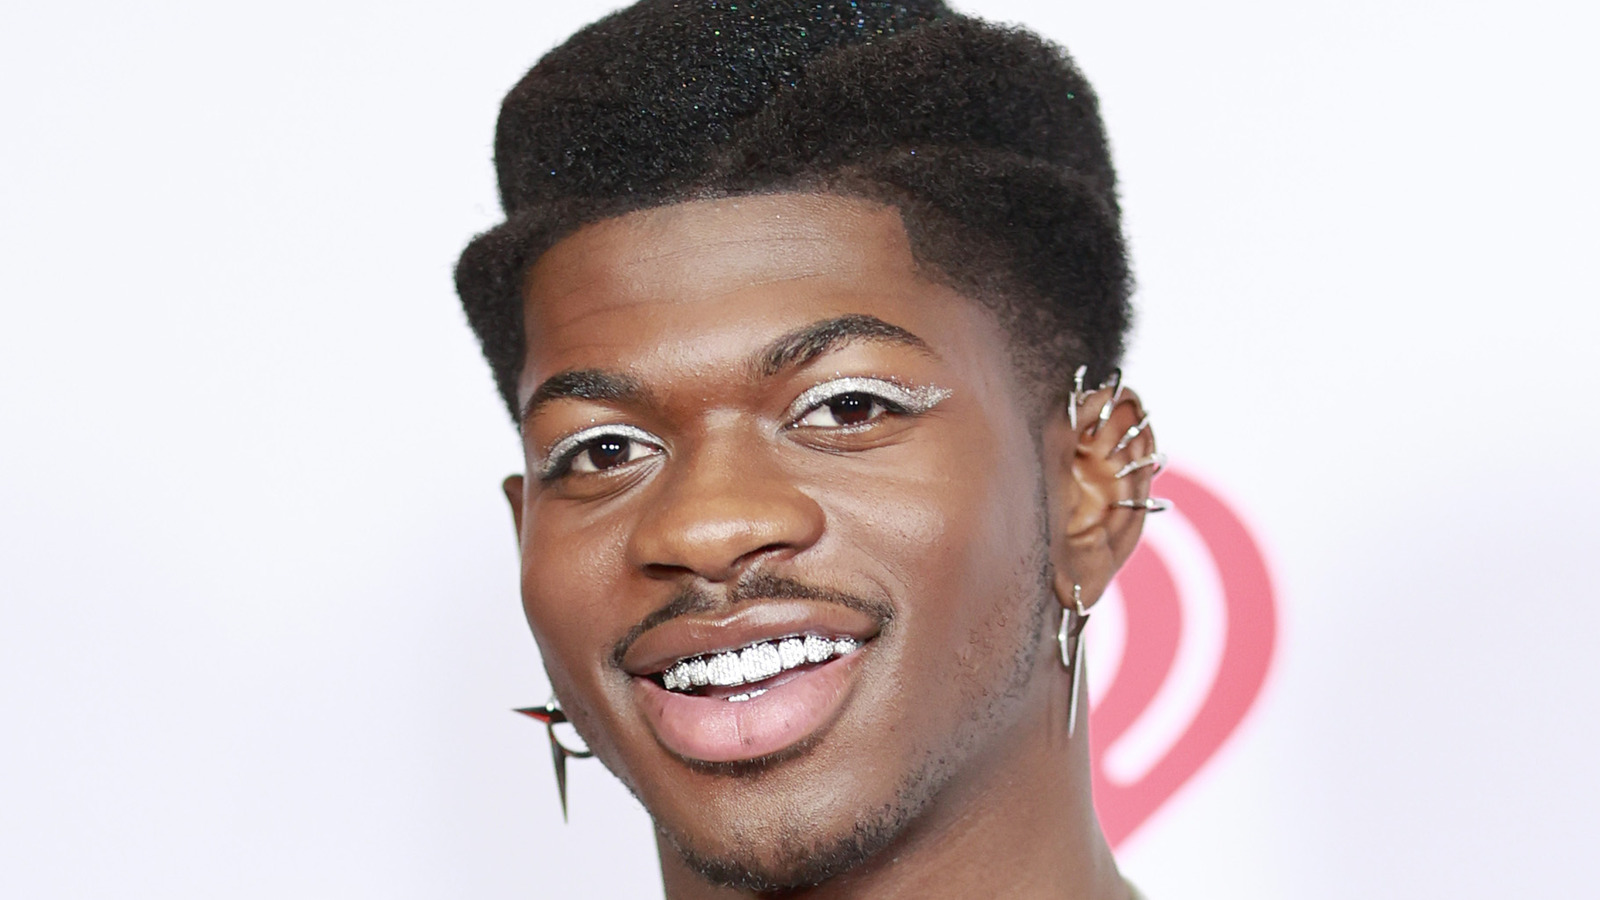 Who is Lil Nas? Lil Nas X Net Worth